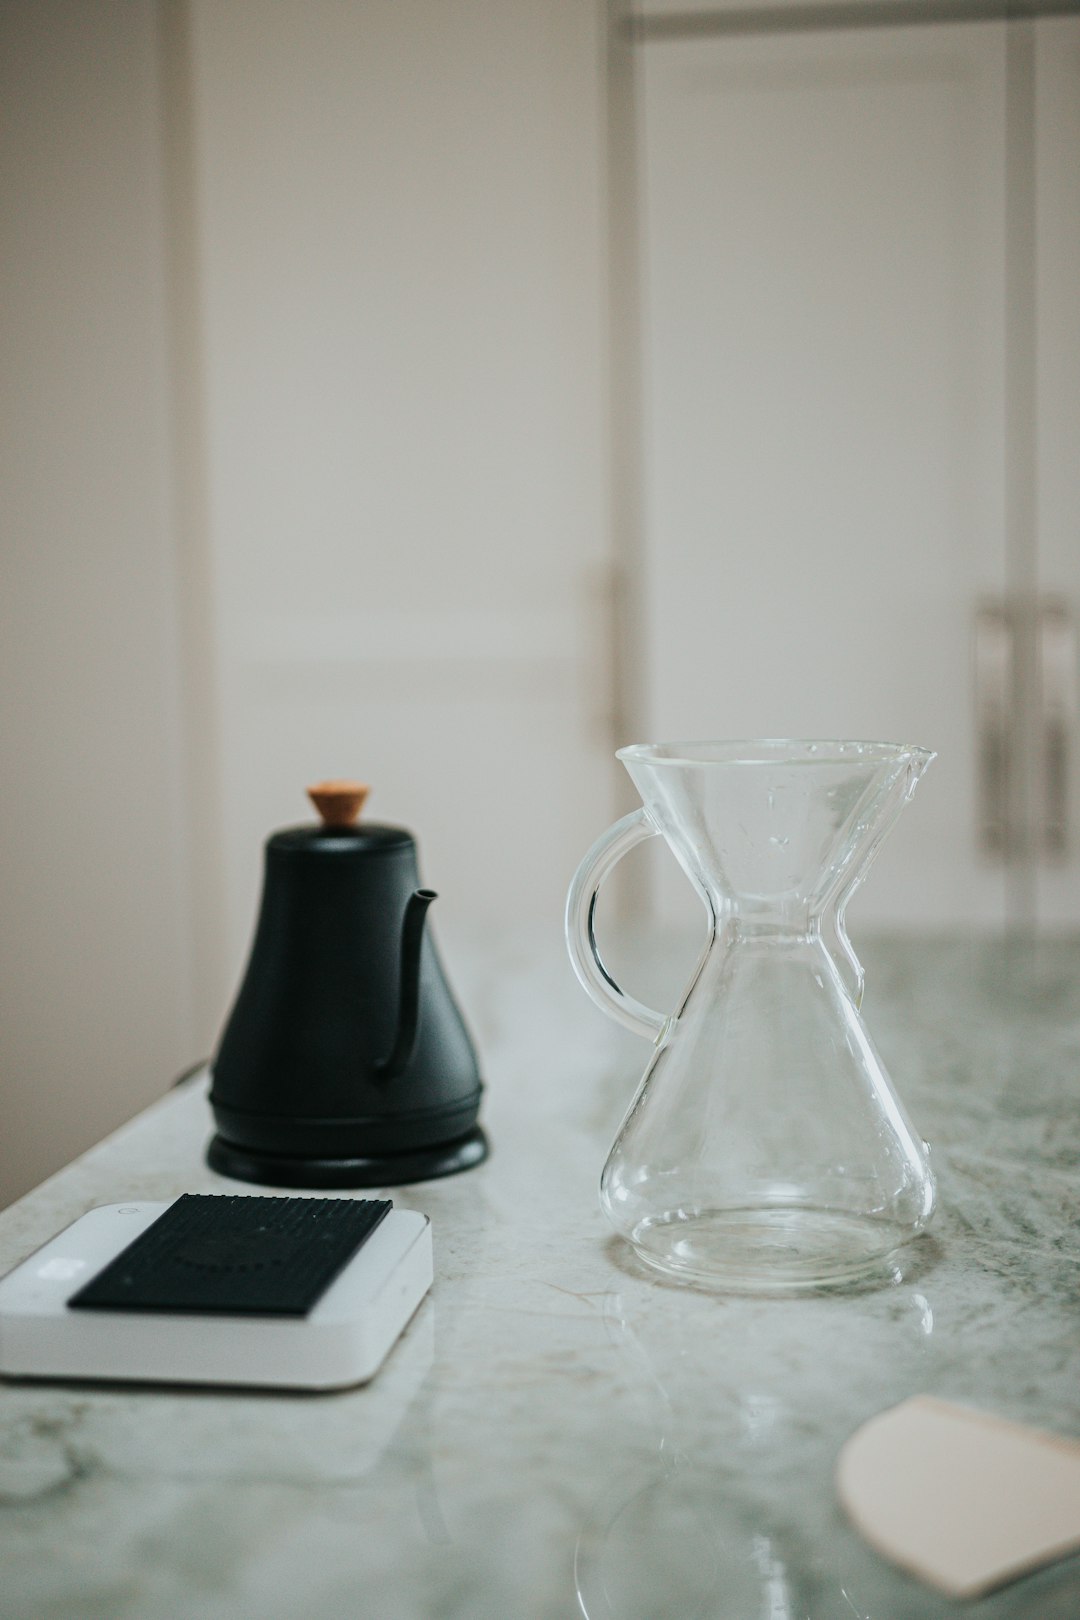 black ceramic teapot beside clear glass pitcher on white table